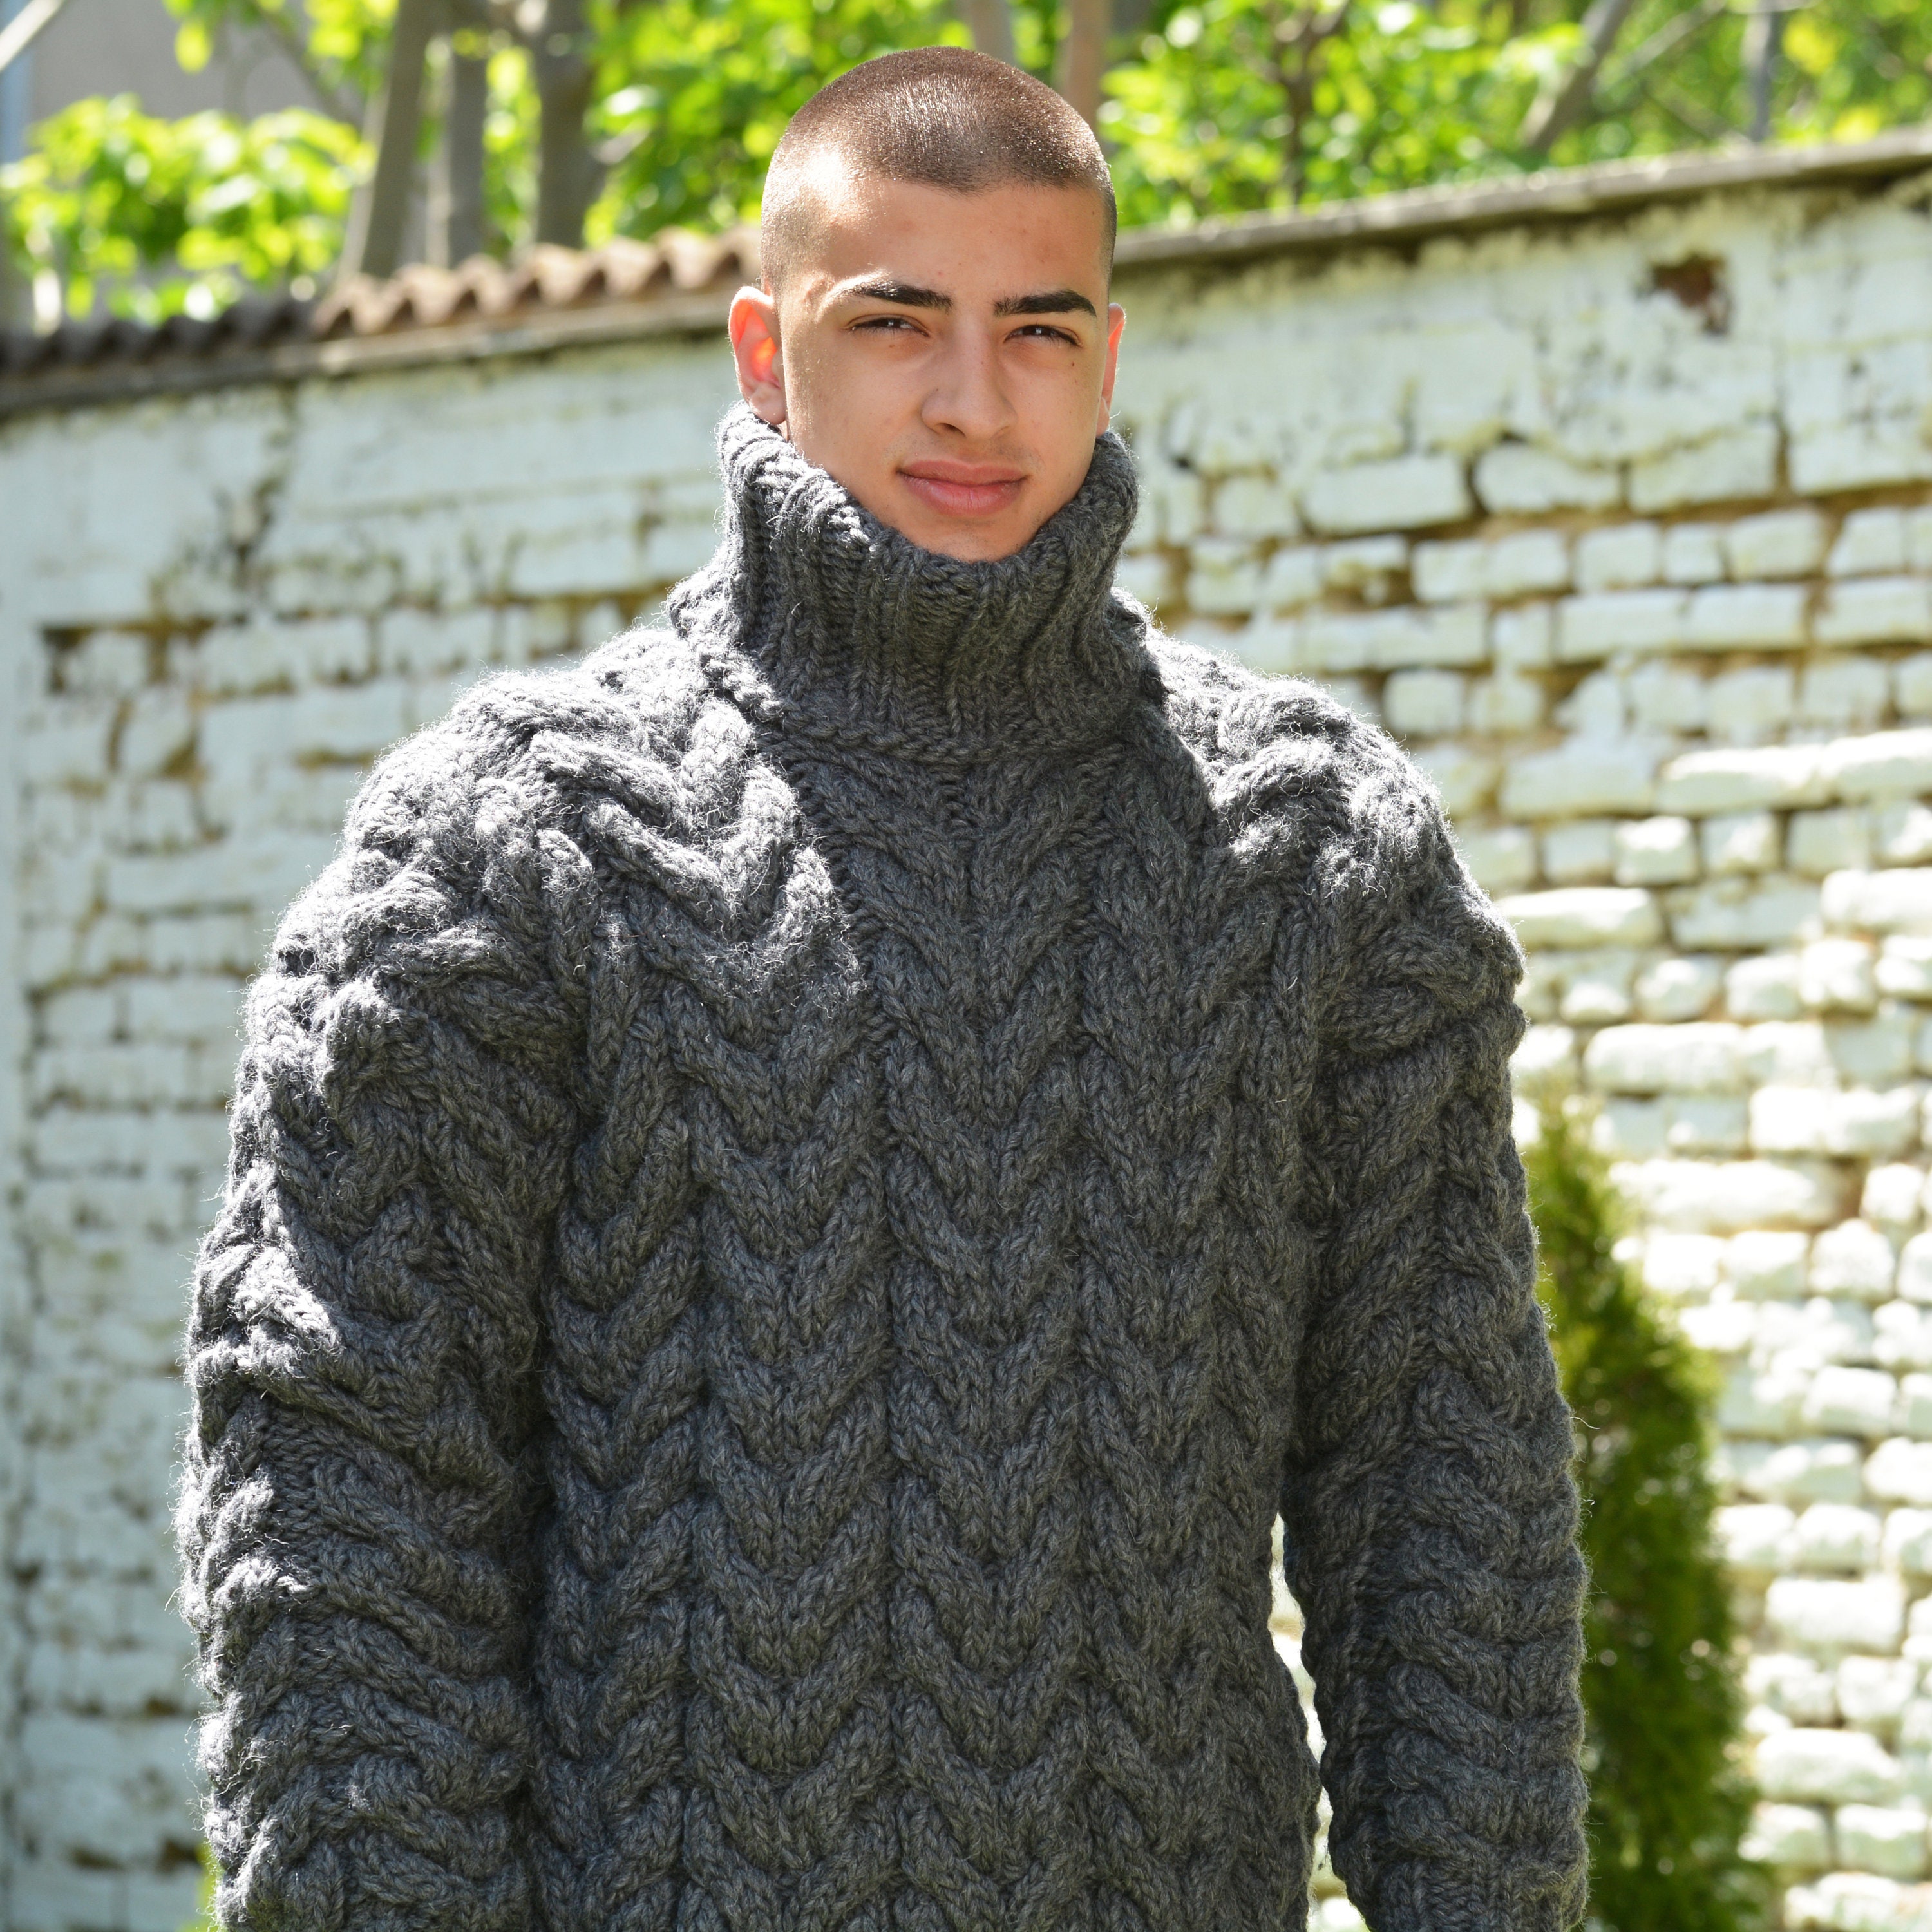 Wool Turtleneck Sweater, Cable Hand Knitted Jumper, Light Grey Fuzzy Jersey  by Extravagantza 